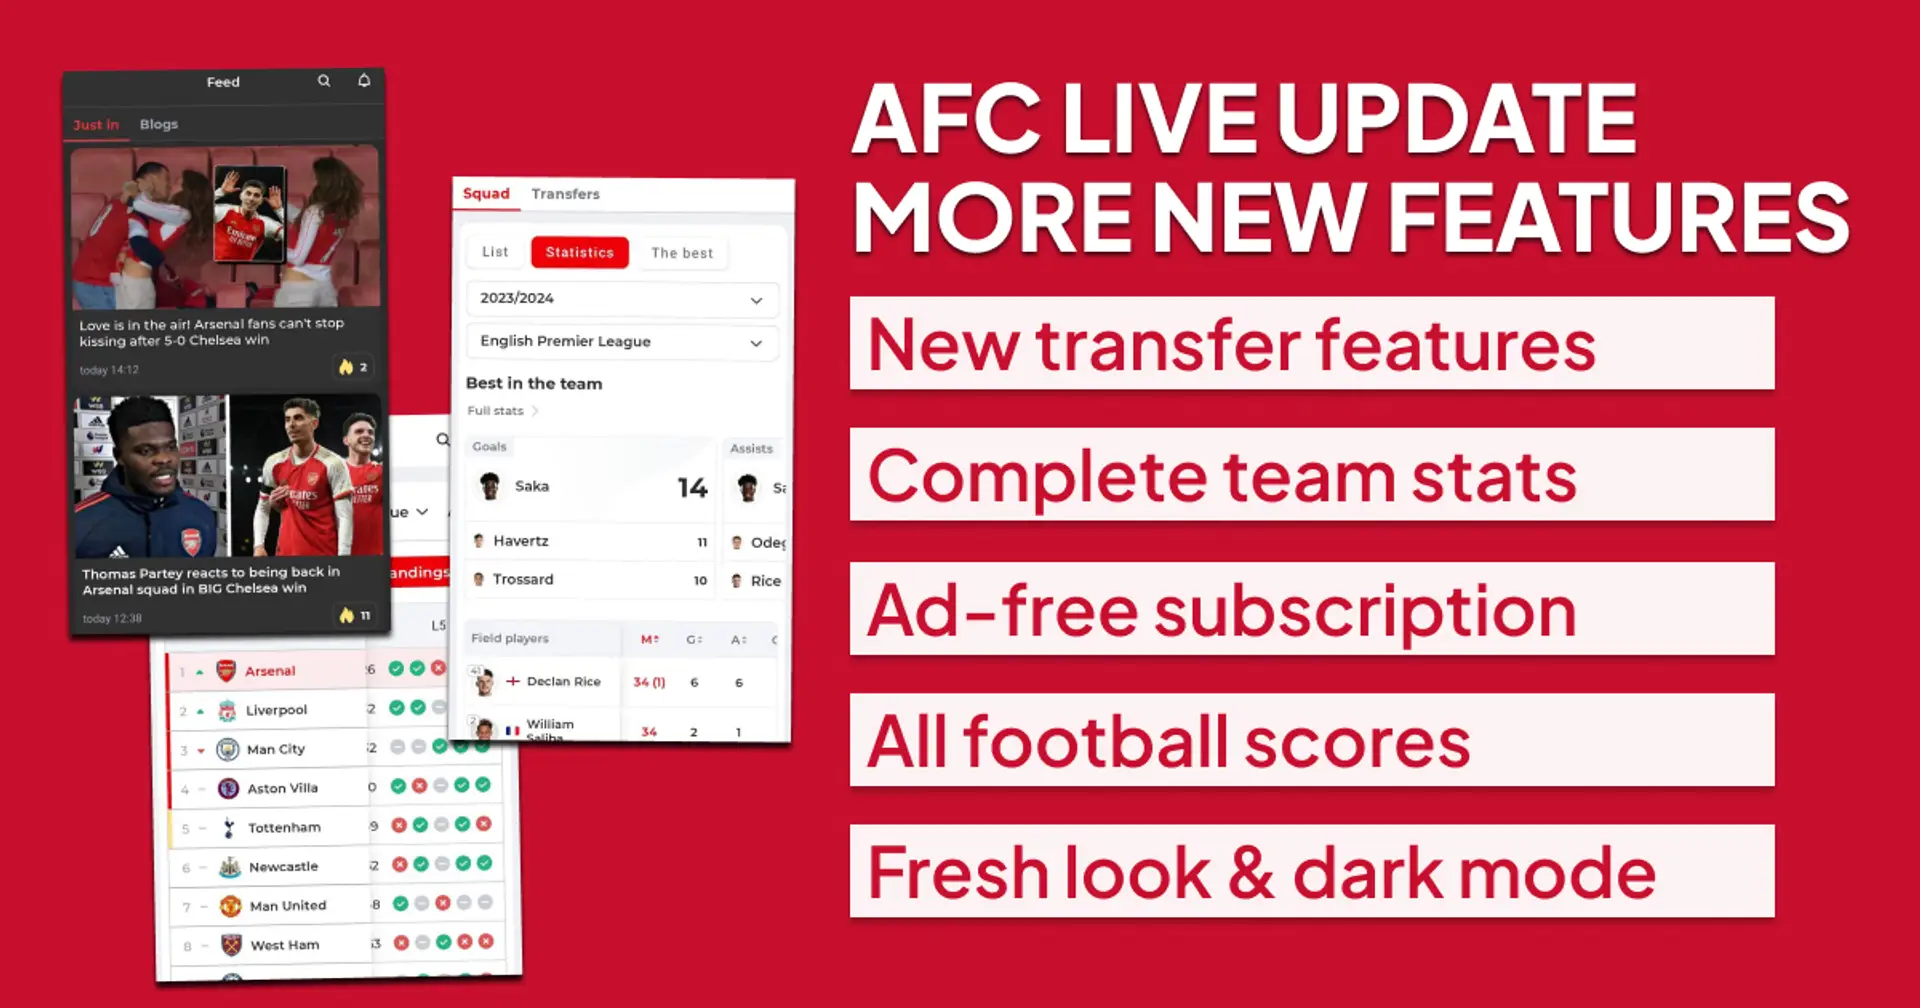 ❤️ Premium ad-free subscription, all football scores, transfer content & more new features in app UPDATE